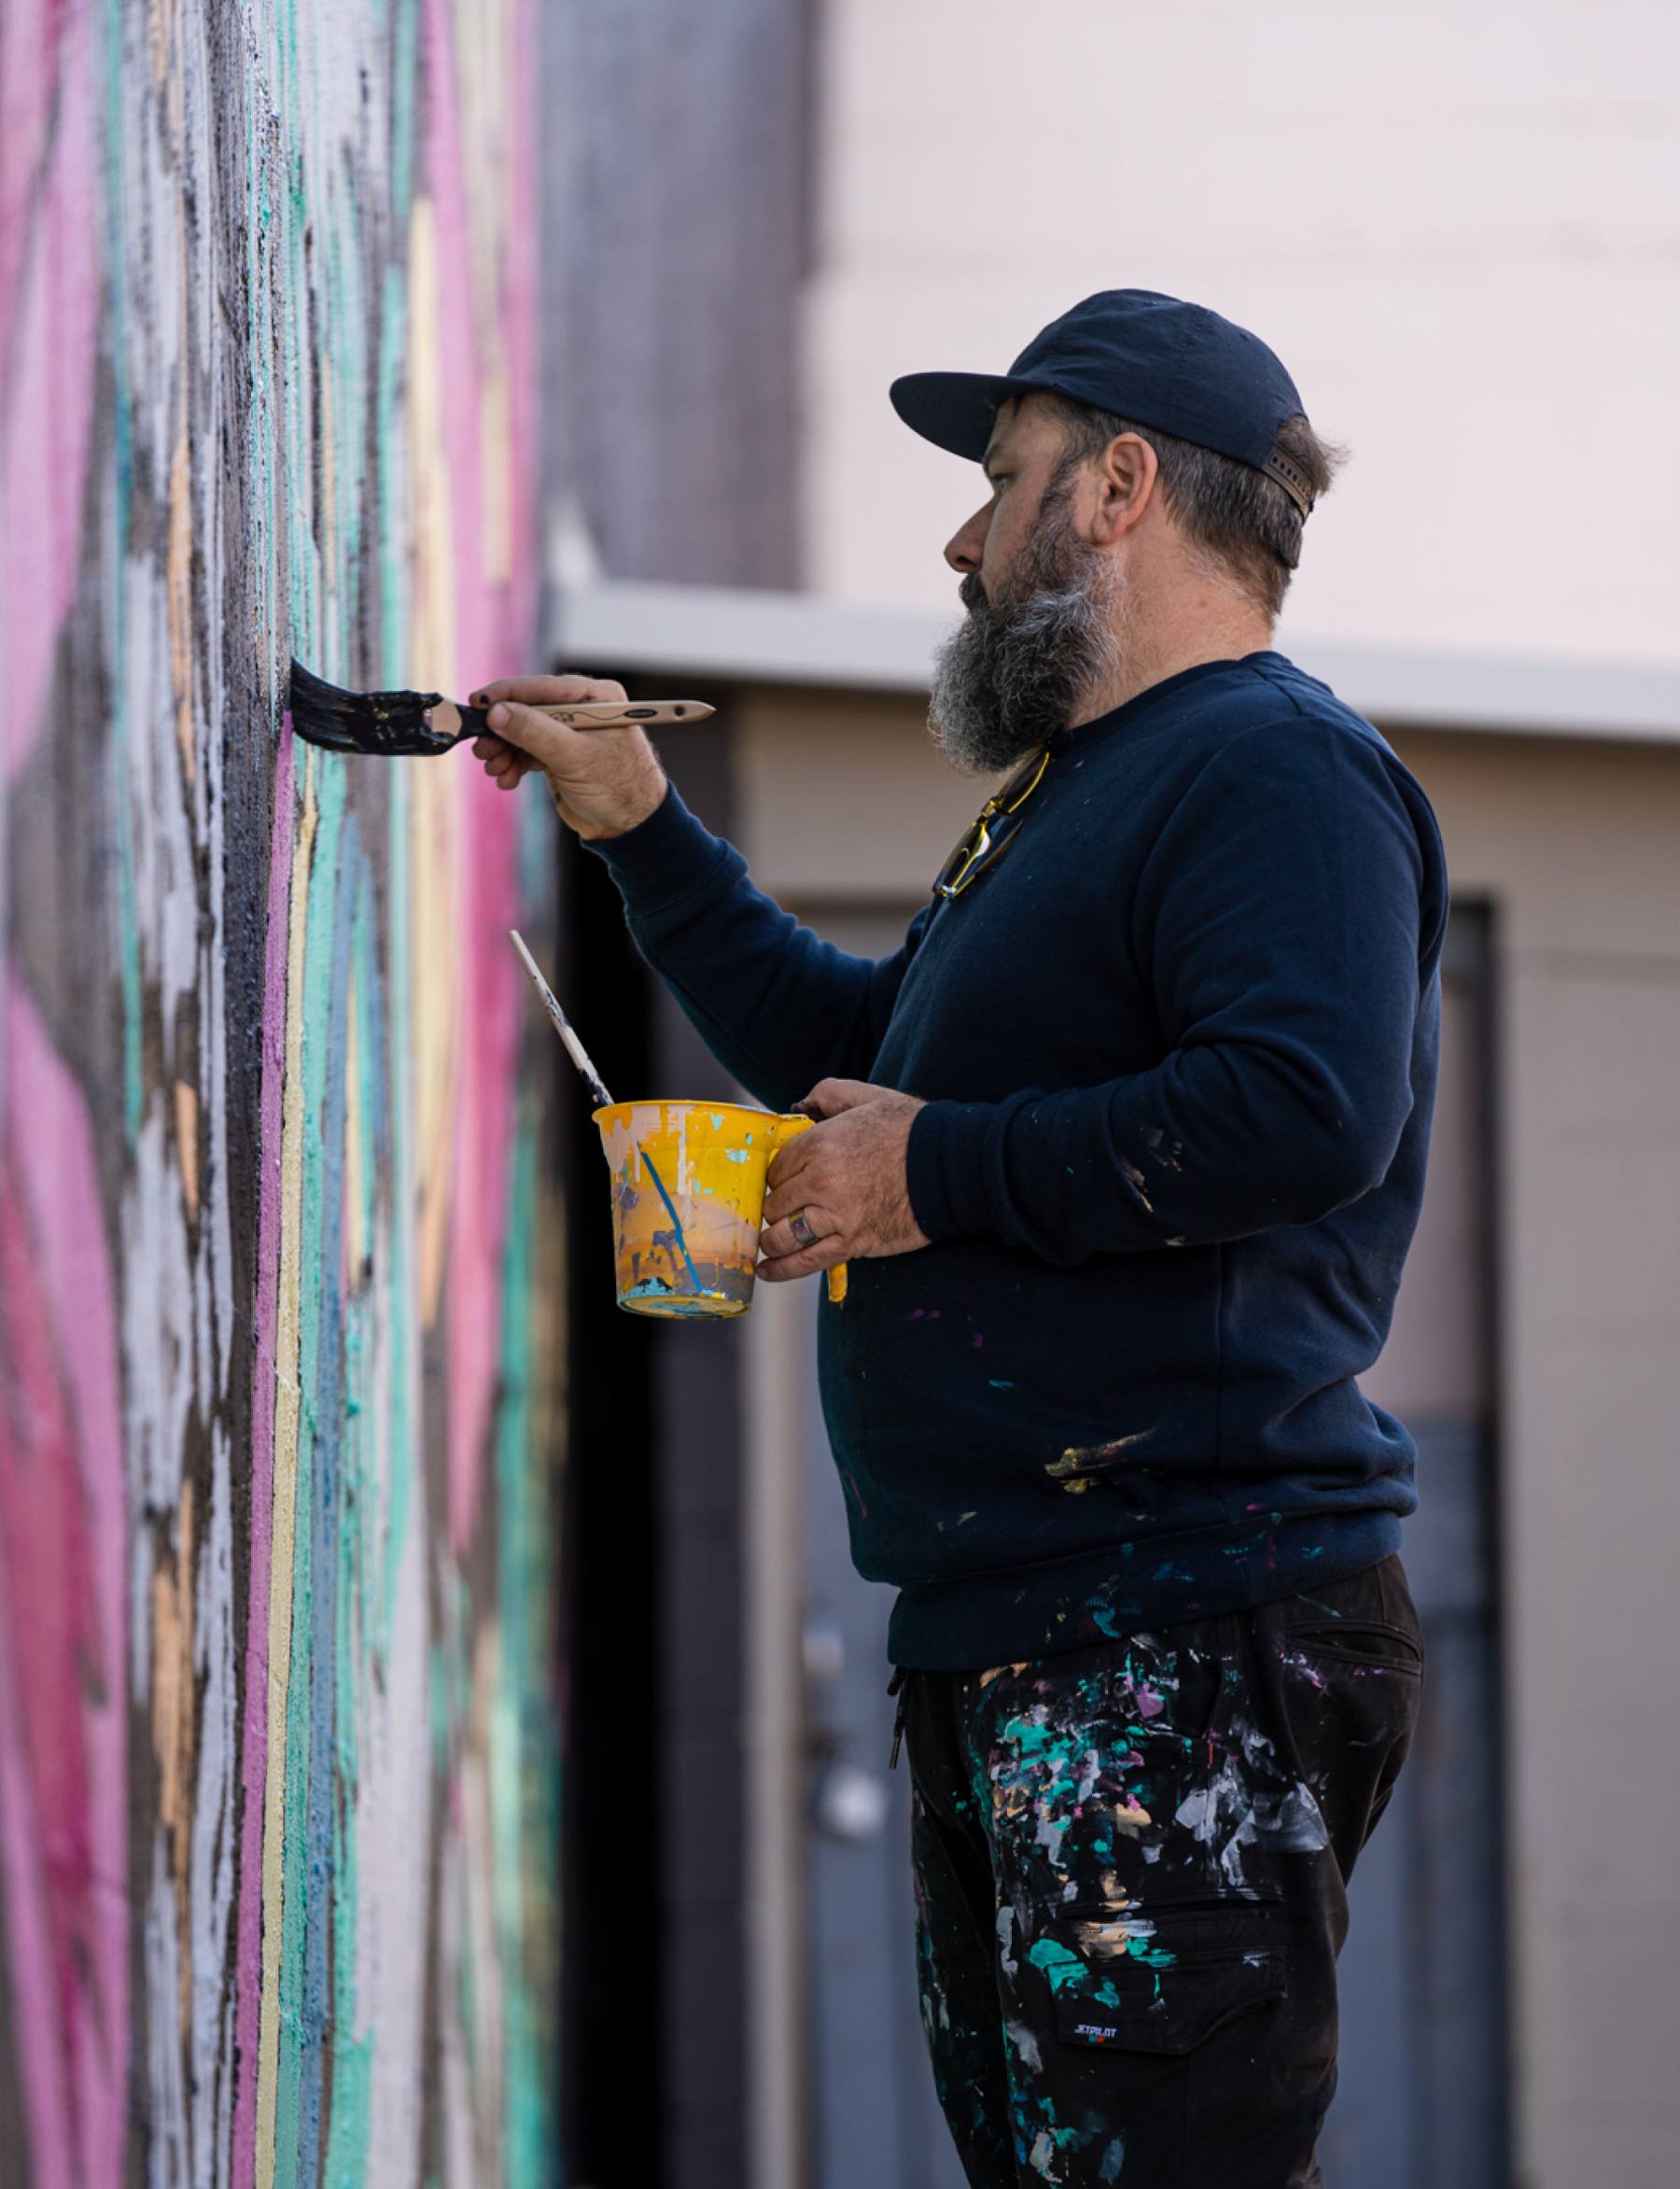 Up-close-painting-a-mural-for-Miami-Street-Art-Festival